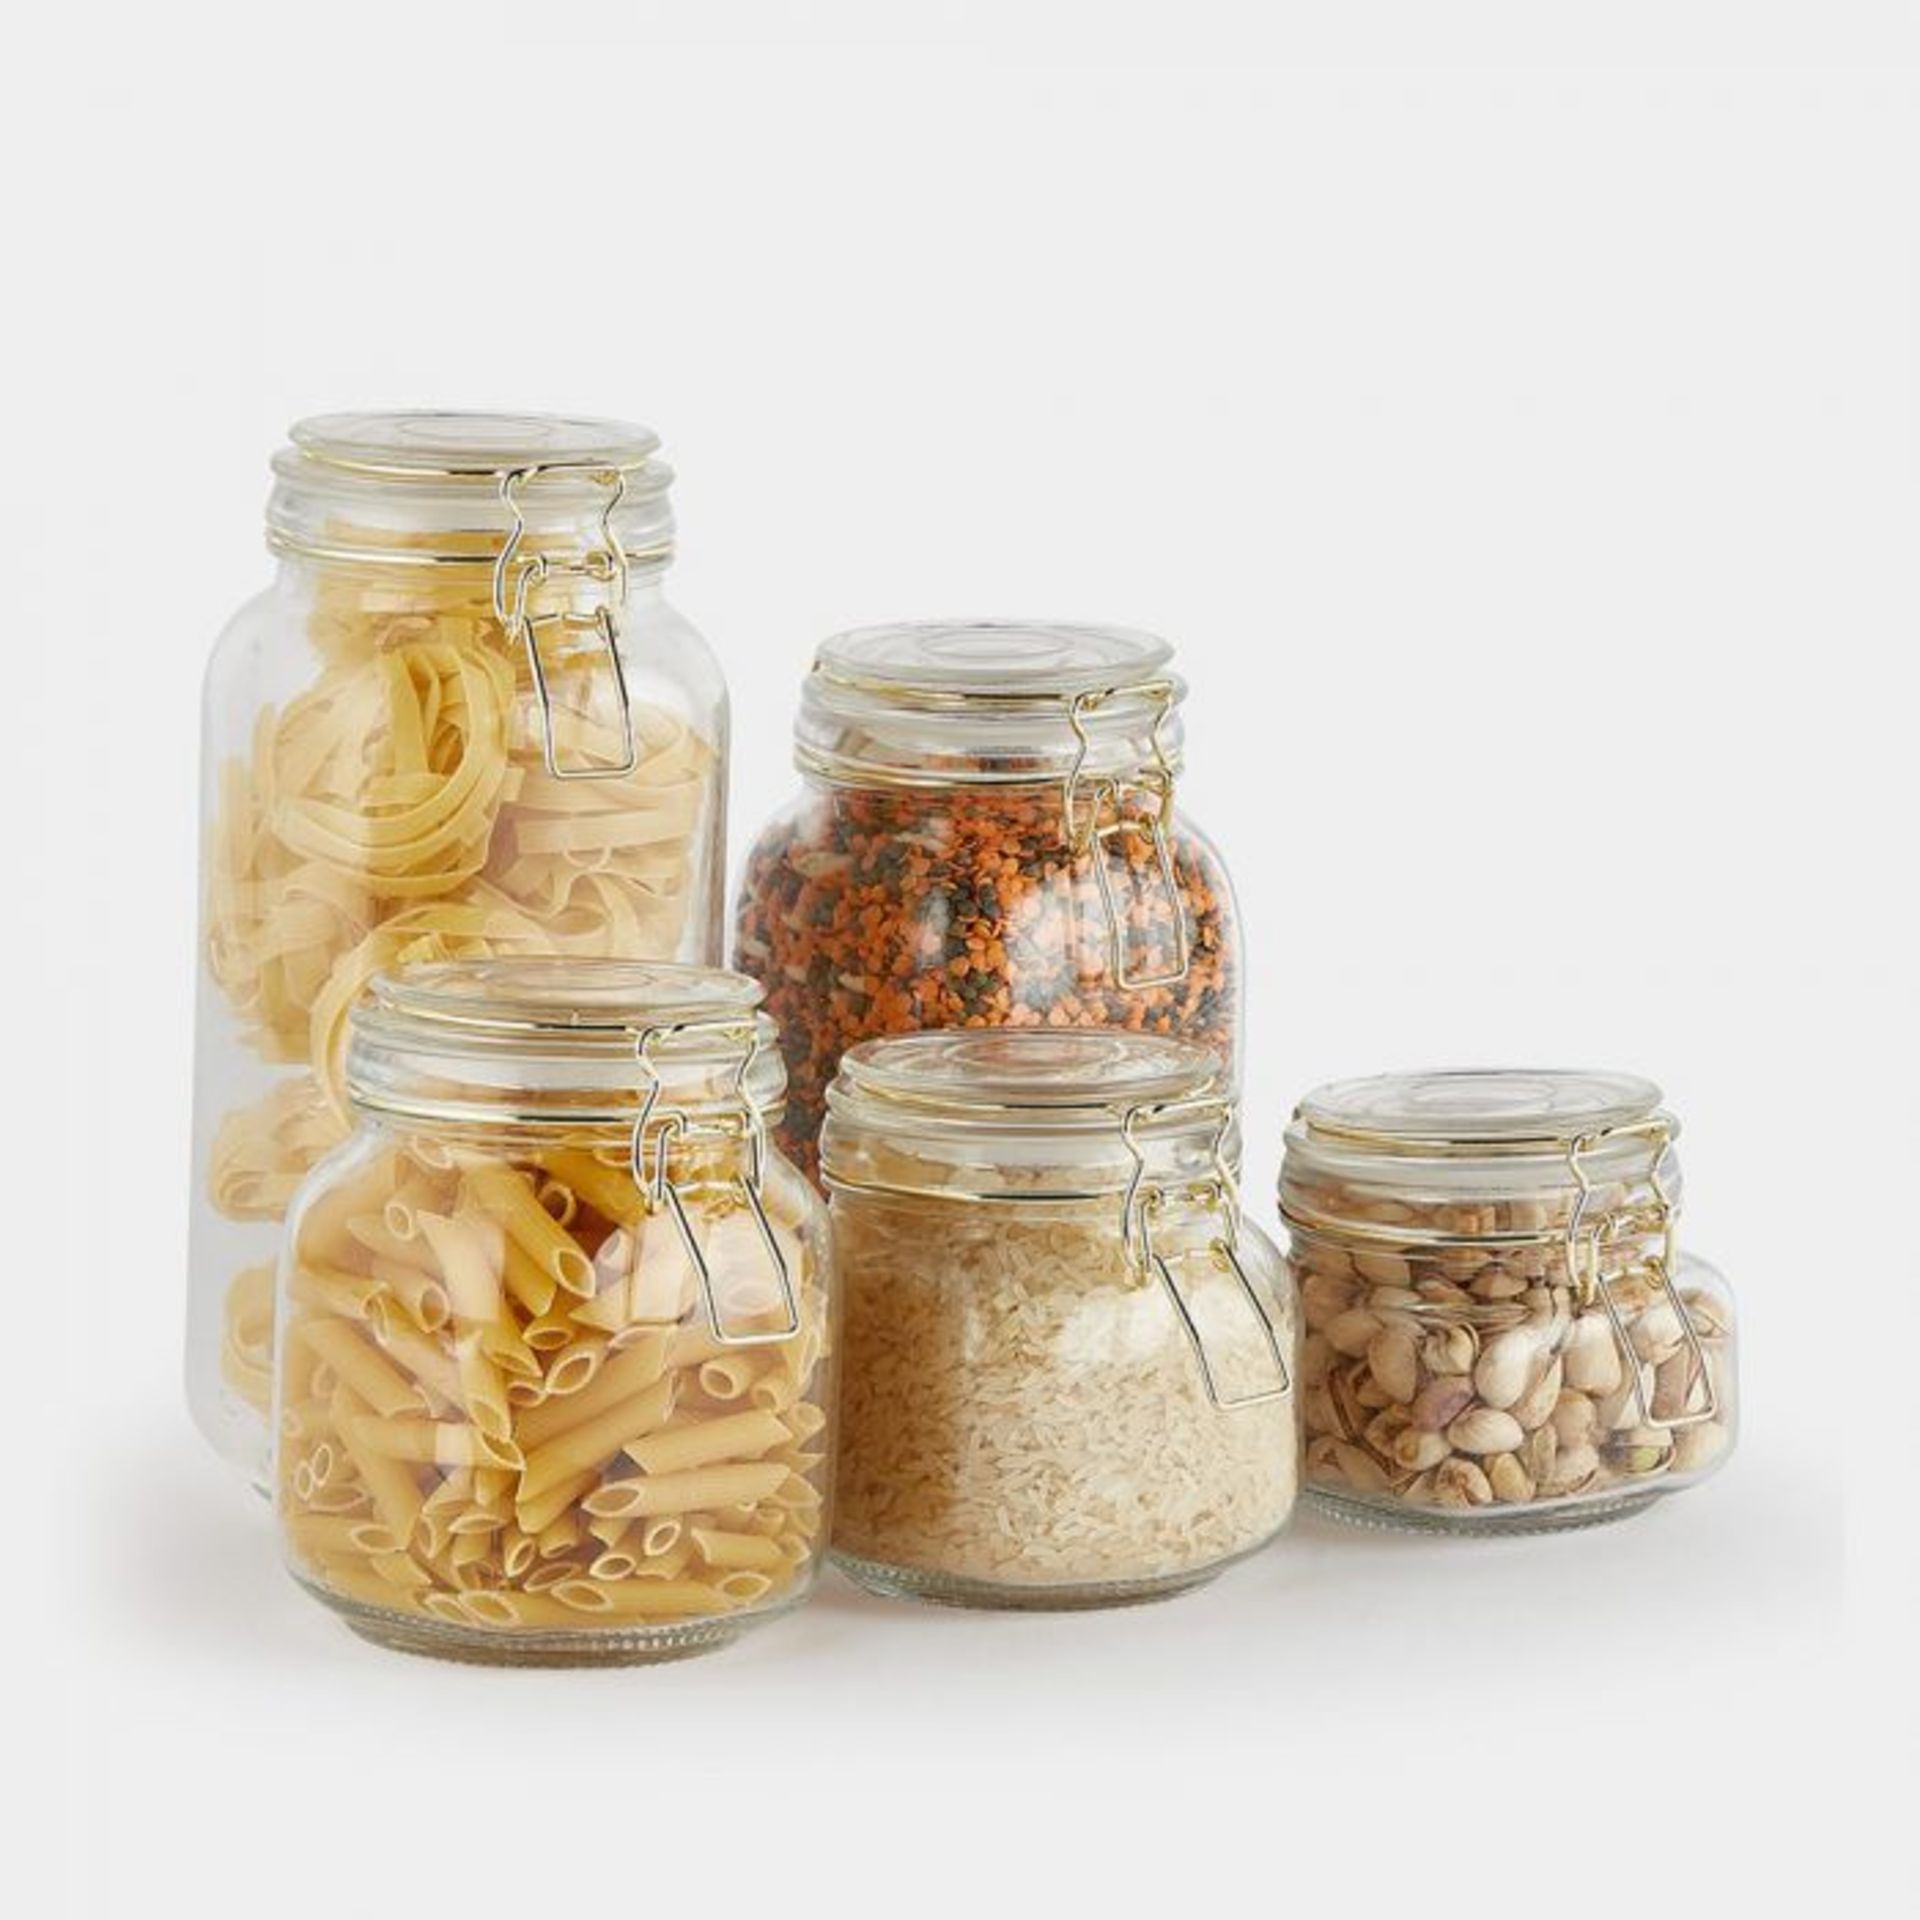 7 X BRAND NEW SETS OF 5 GLASS STORAGE JARS WITH GOLD CLIP TOP FOR PASTA, BUSCUITS, SUGAR, PERFECT